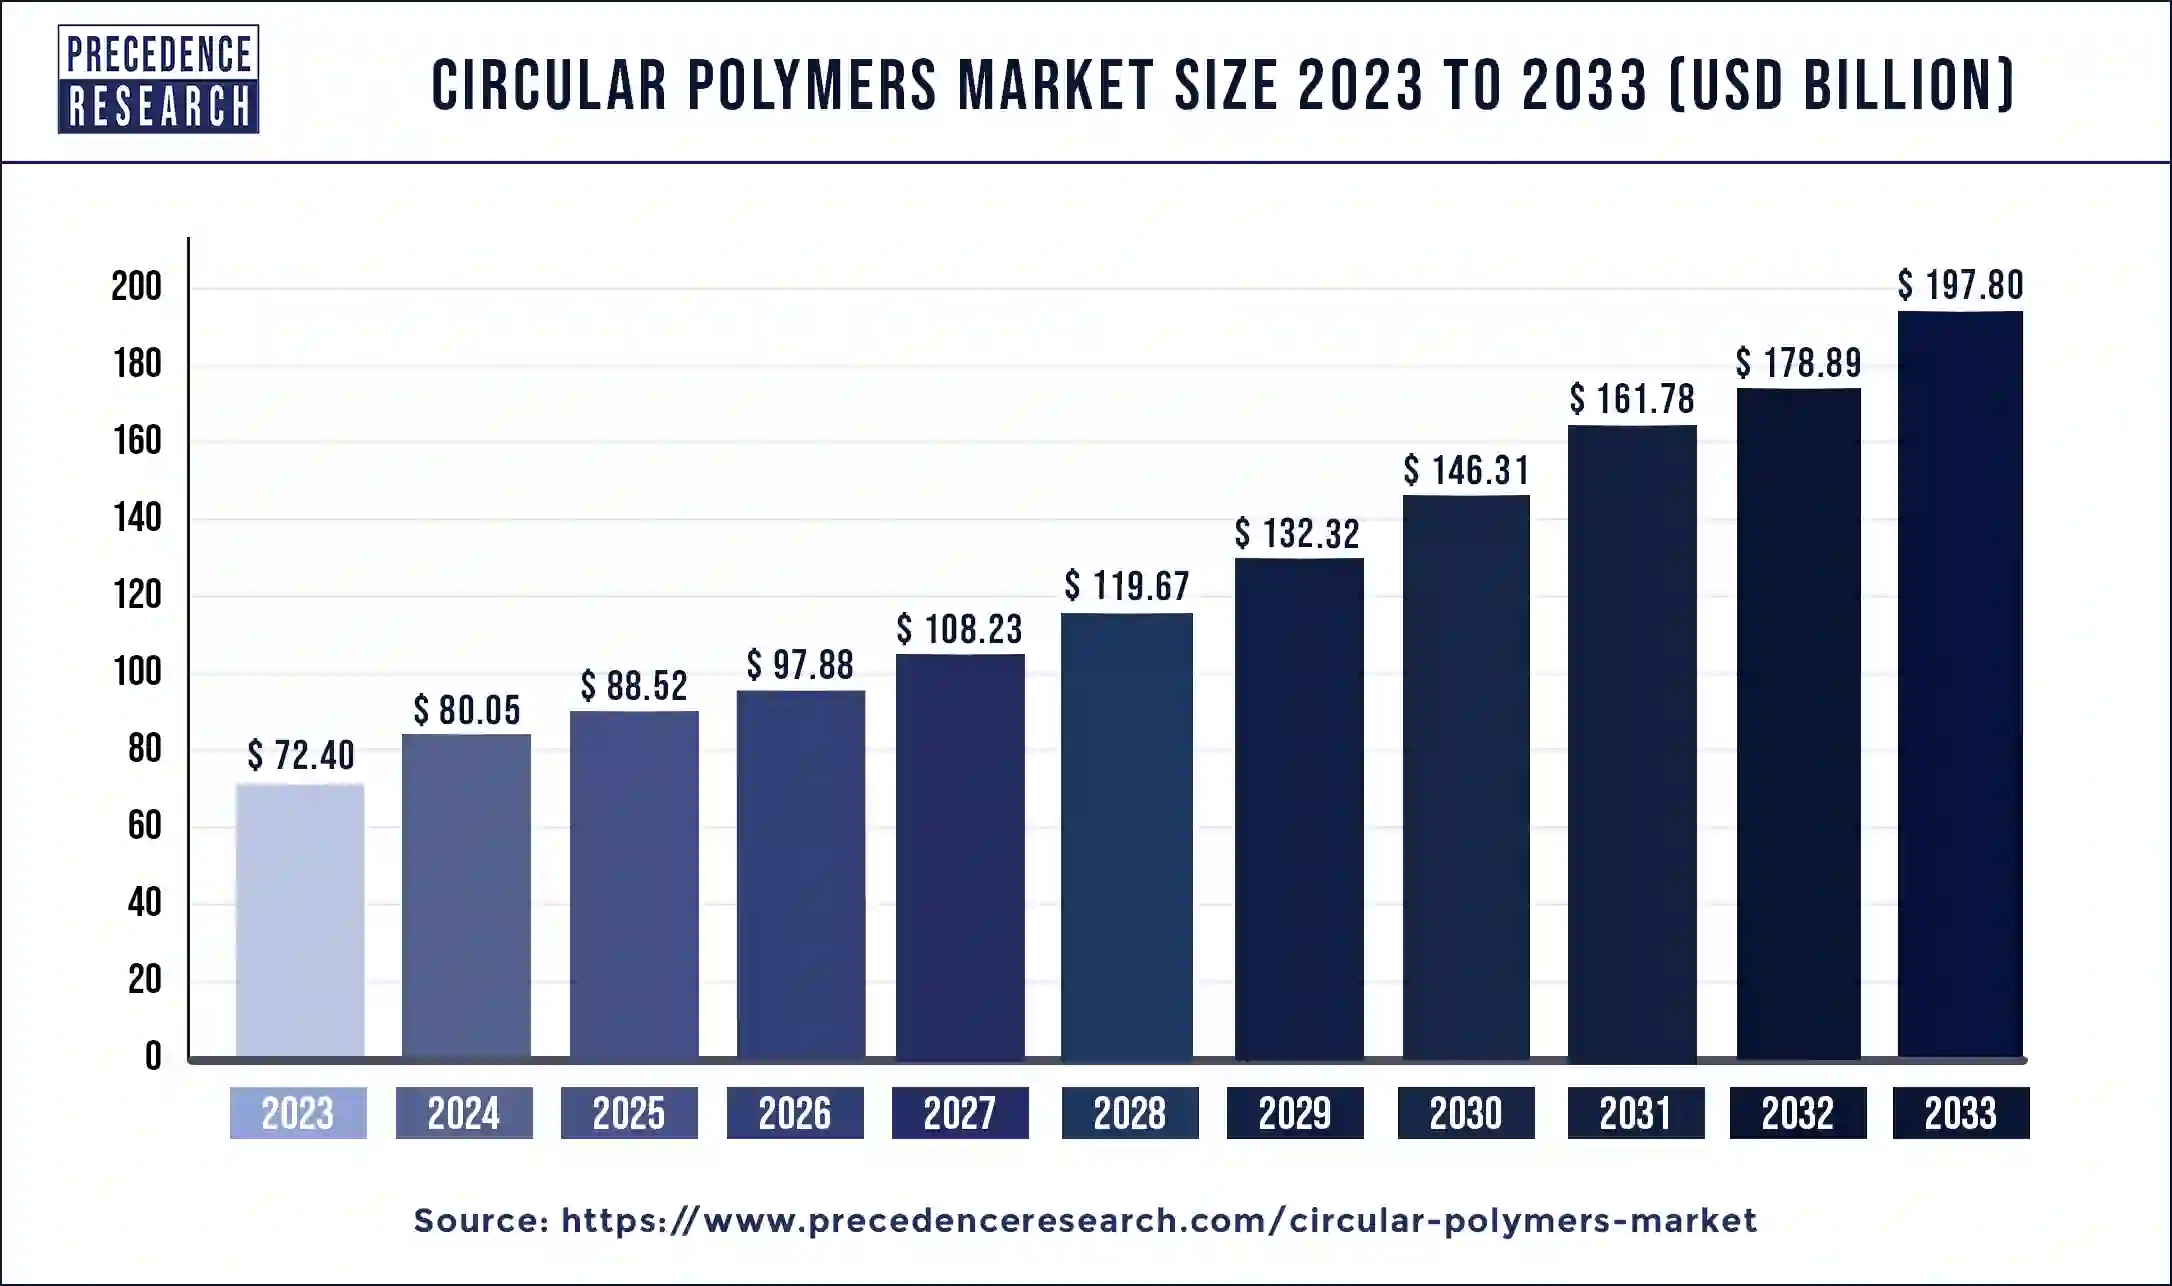 Circular Polymers Market Size 2024 to 2033